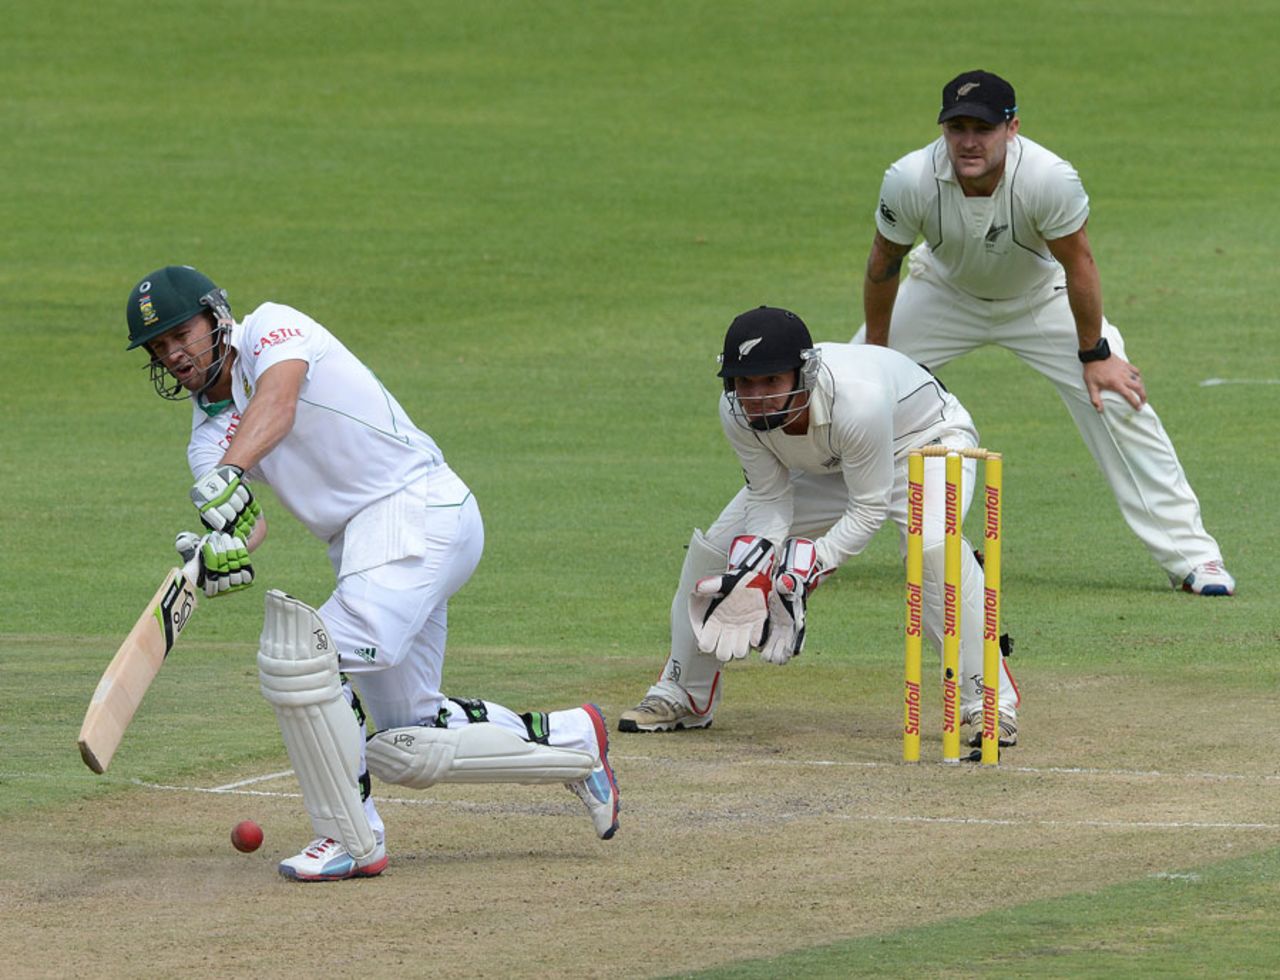 Hashim Amla looked well set going past a half-century, South Africa v New Zealand, 2nd Test, Port Elizabeth, 1st day, January 11, 2013